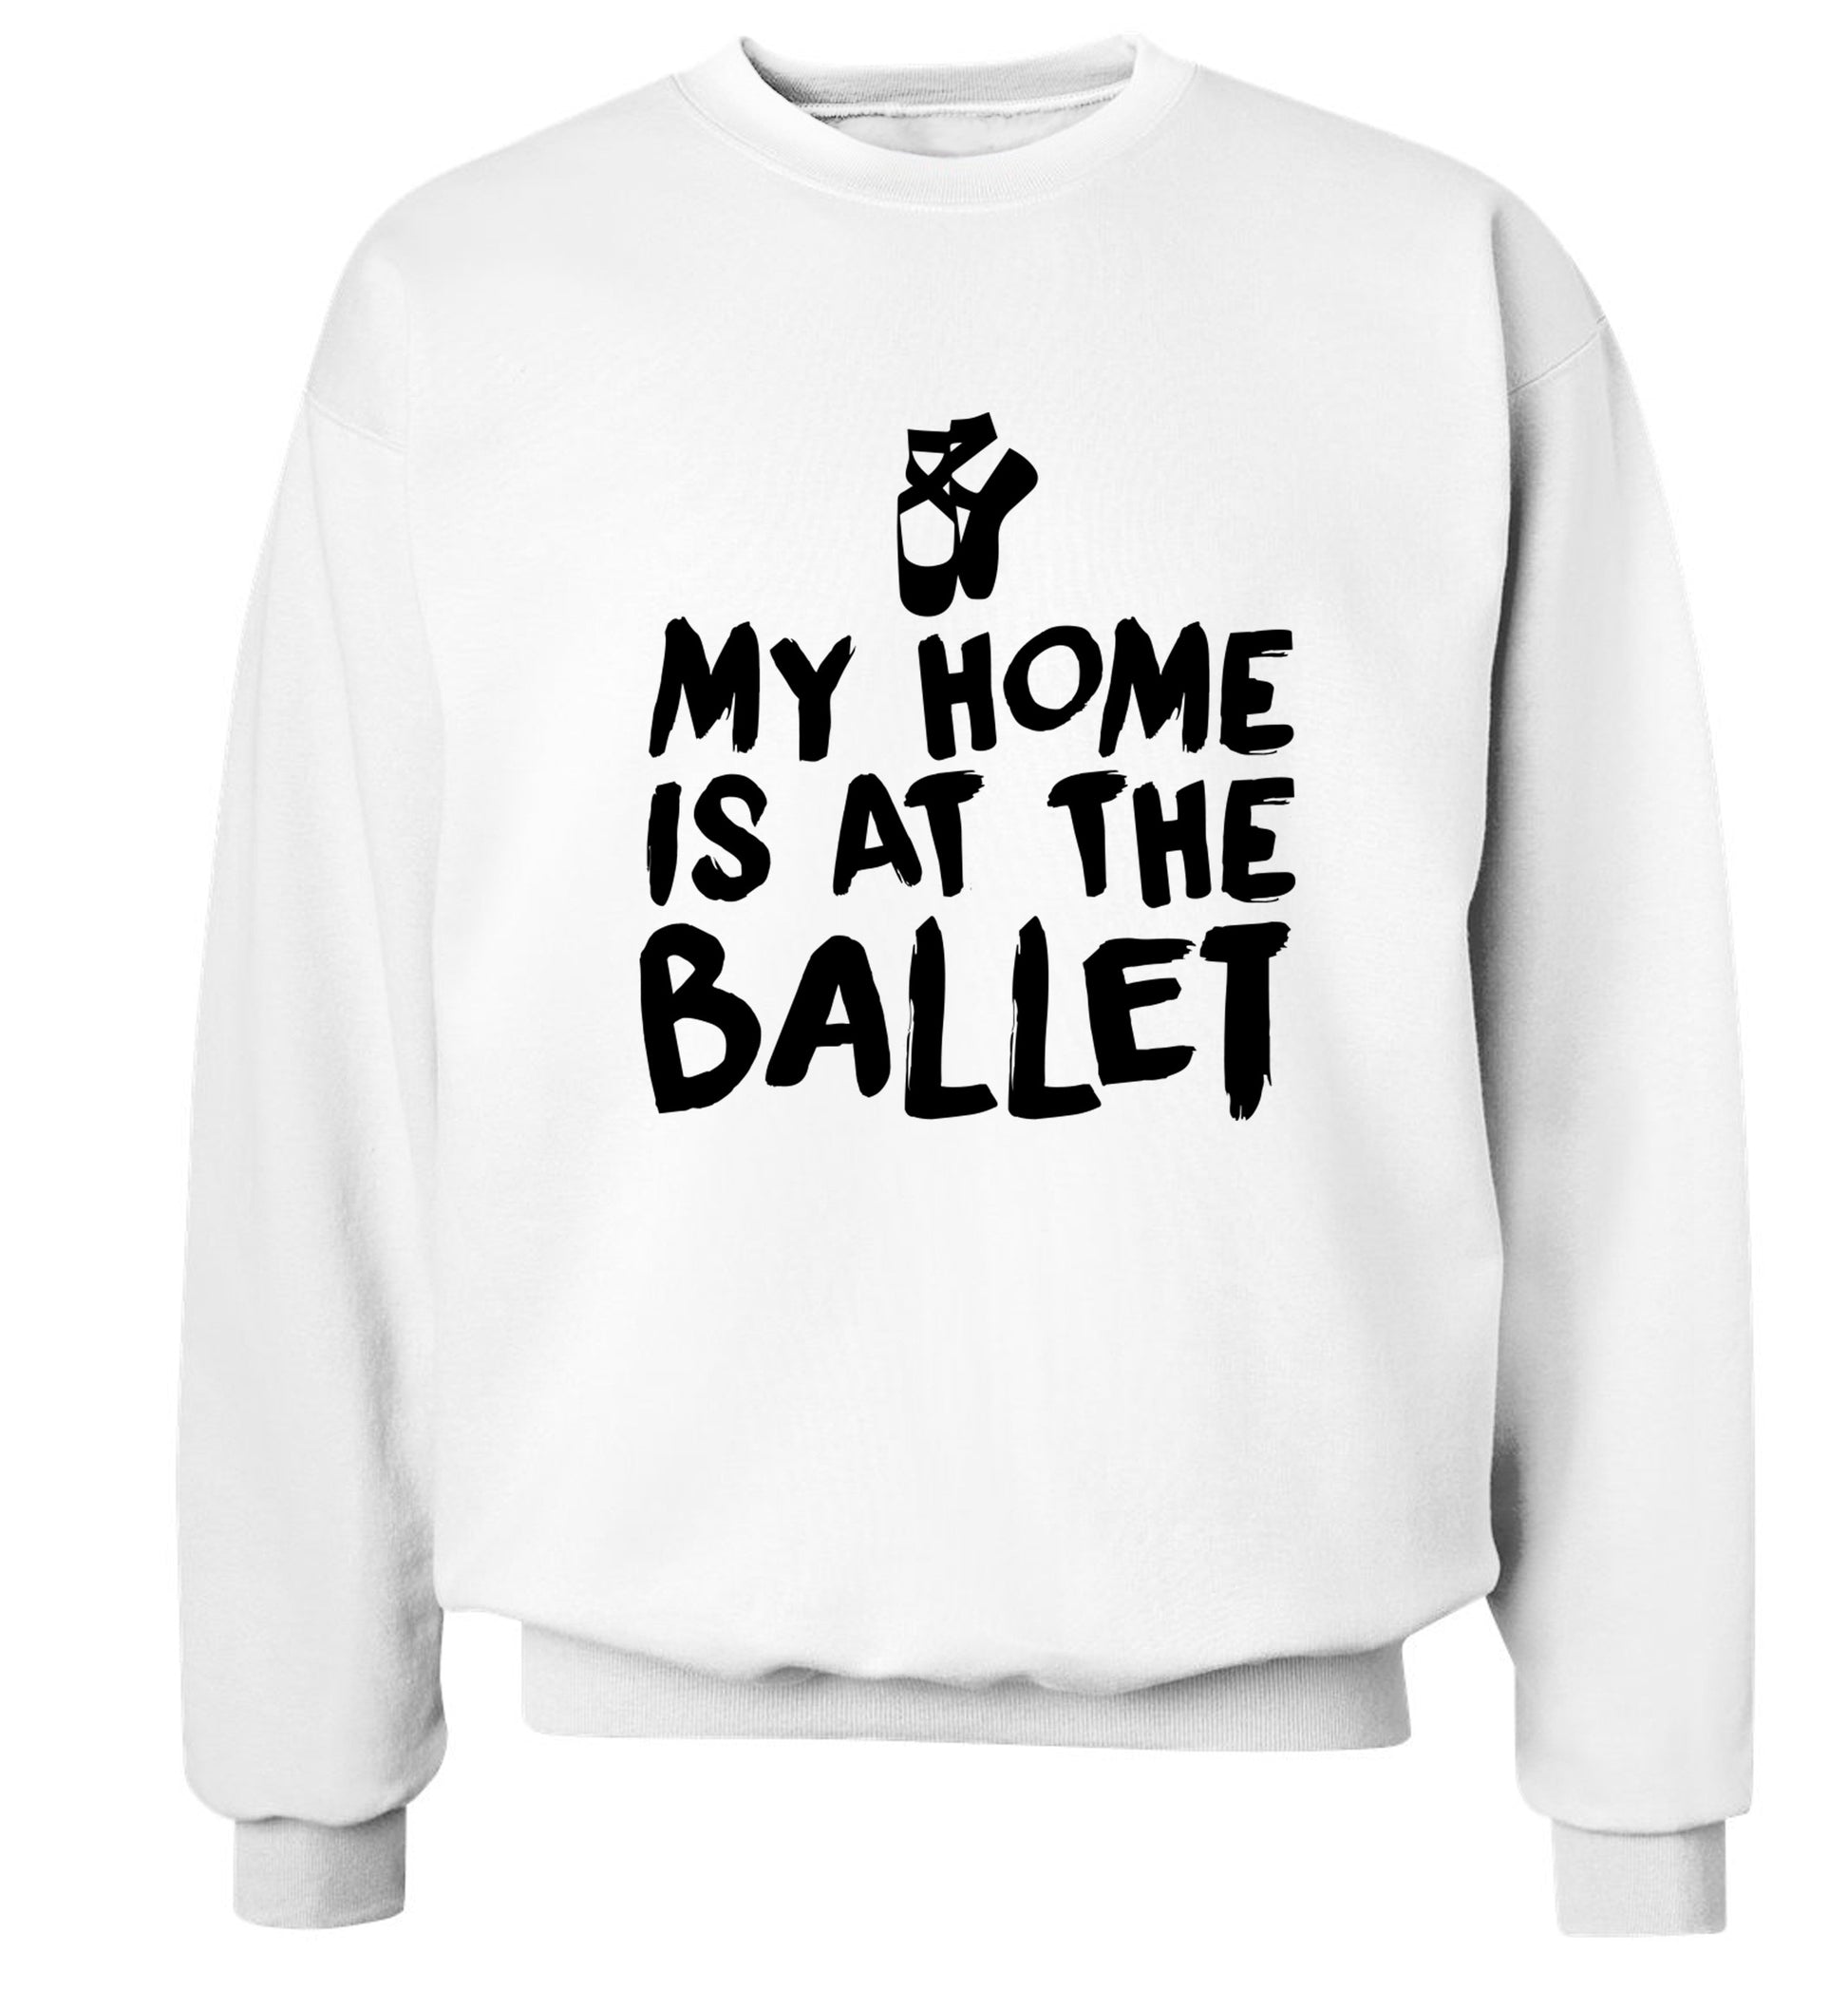 My home is at the dance studio Adult's unisex white Sweater 2XL